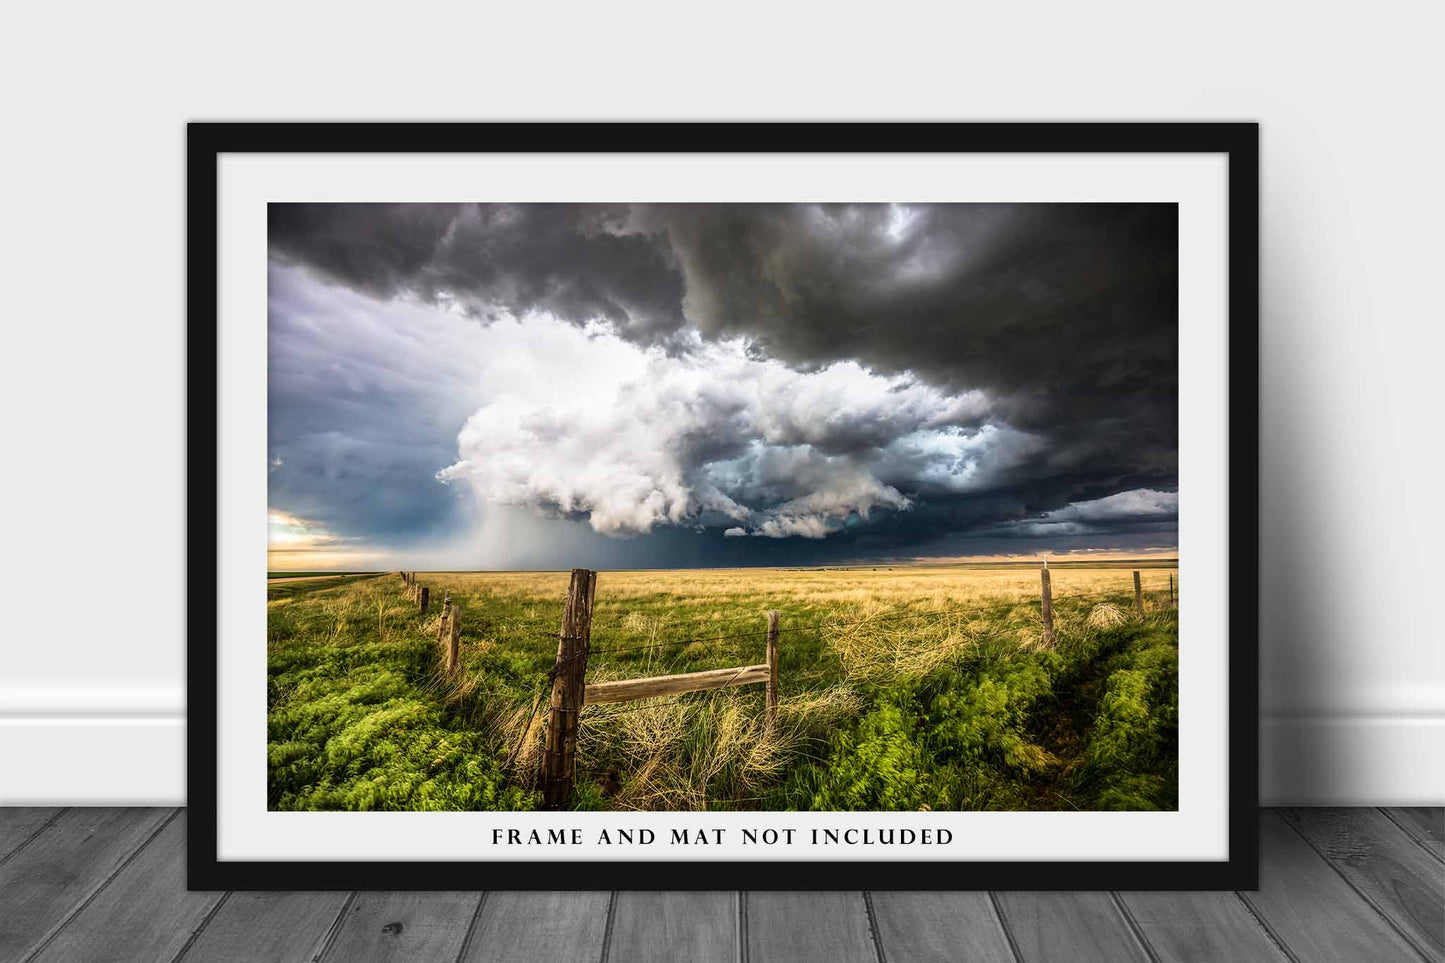 Storm Photography Print (Not Framed) Picture of Supercell Thunderstorm Over Prairie on Stormy Day on Colorado Great Plains Wall Art Nature Decor